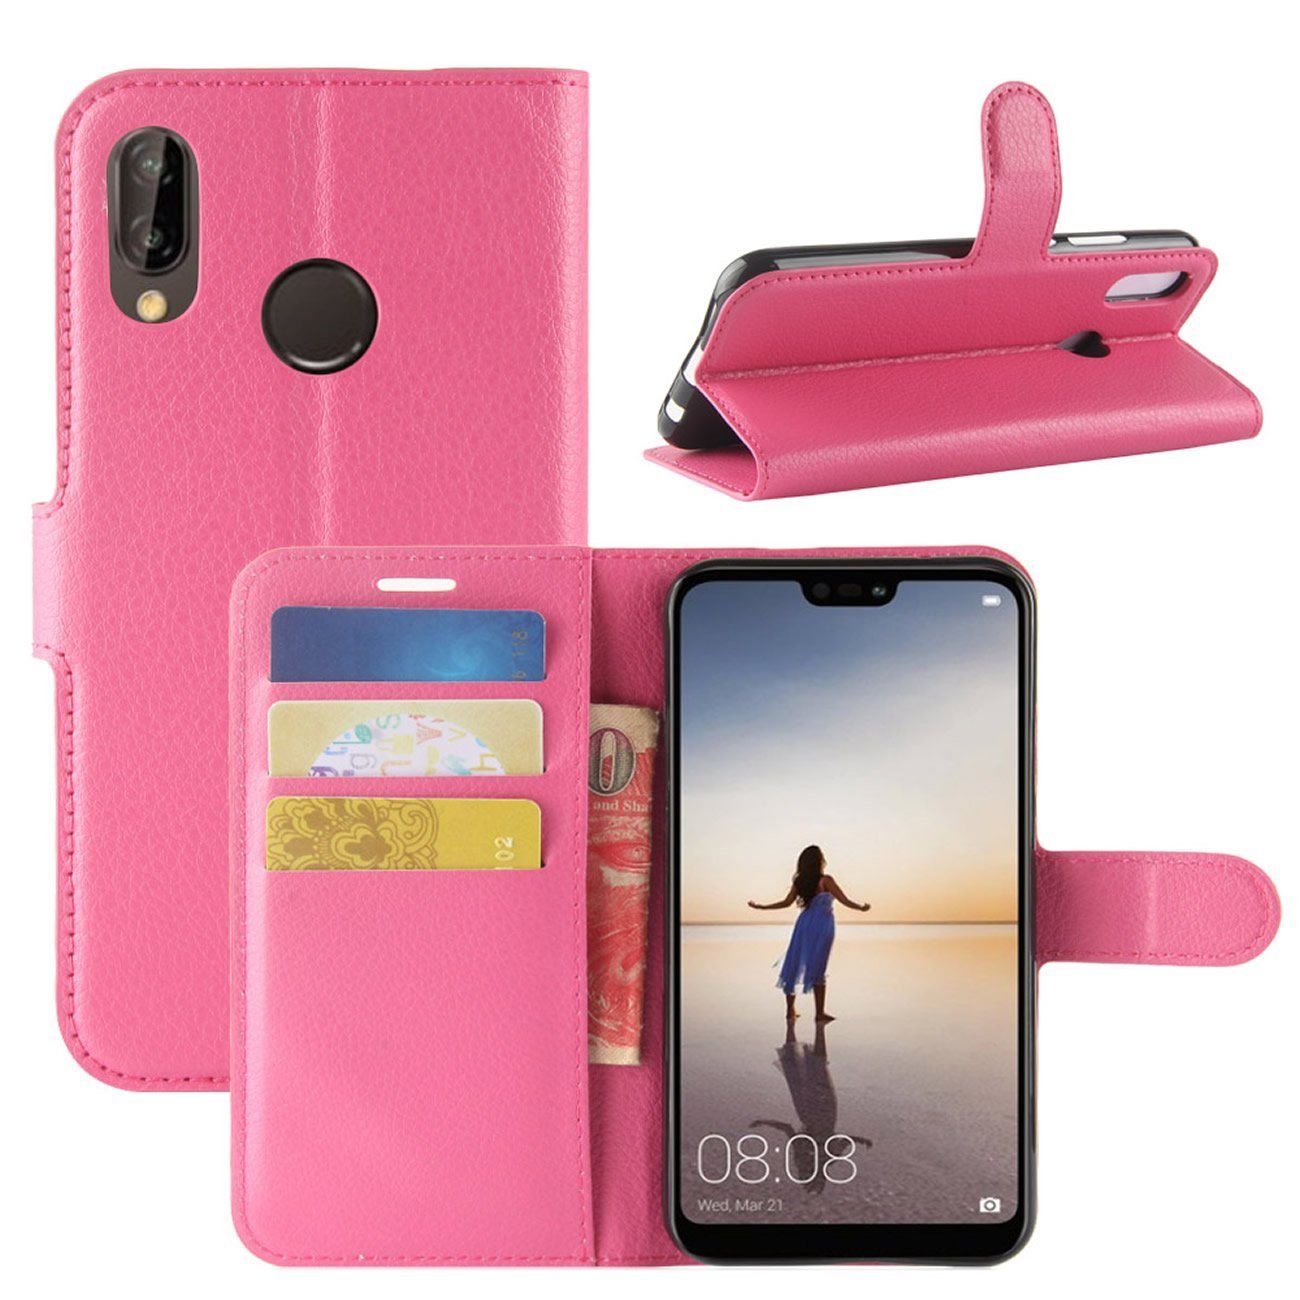 New Premium Leather Wallet Case TPU Cover For HUAWEI Nova 3i-Hot Pink